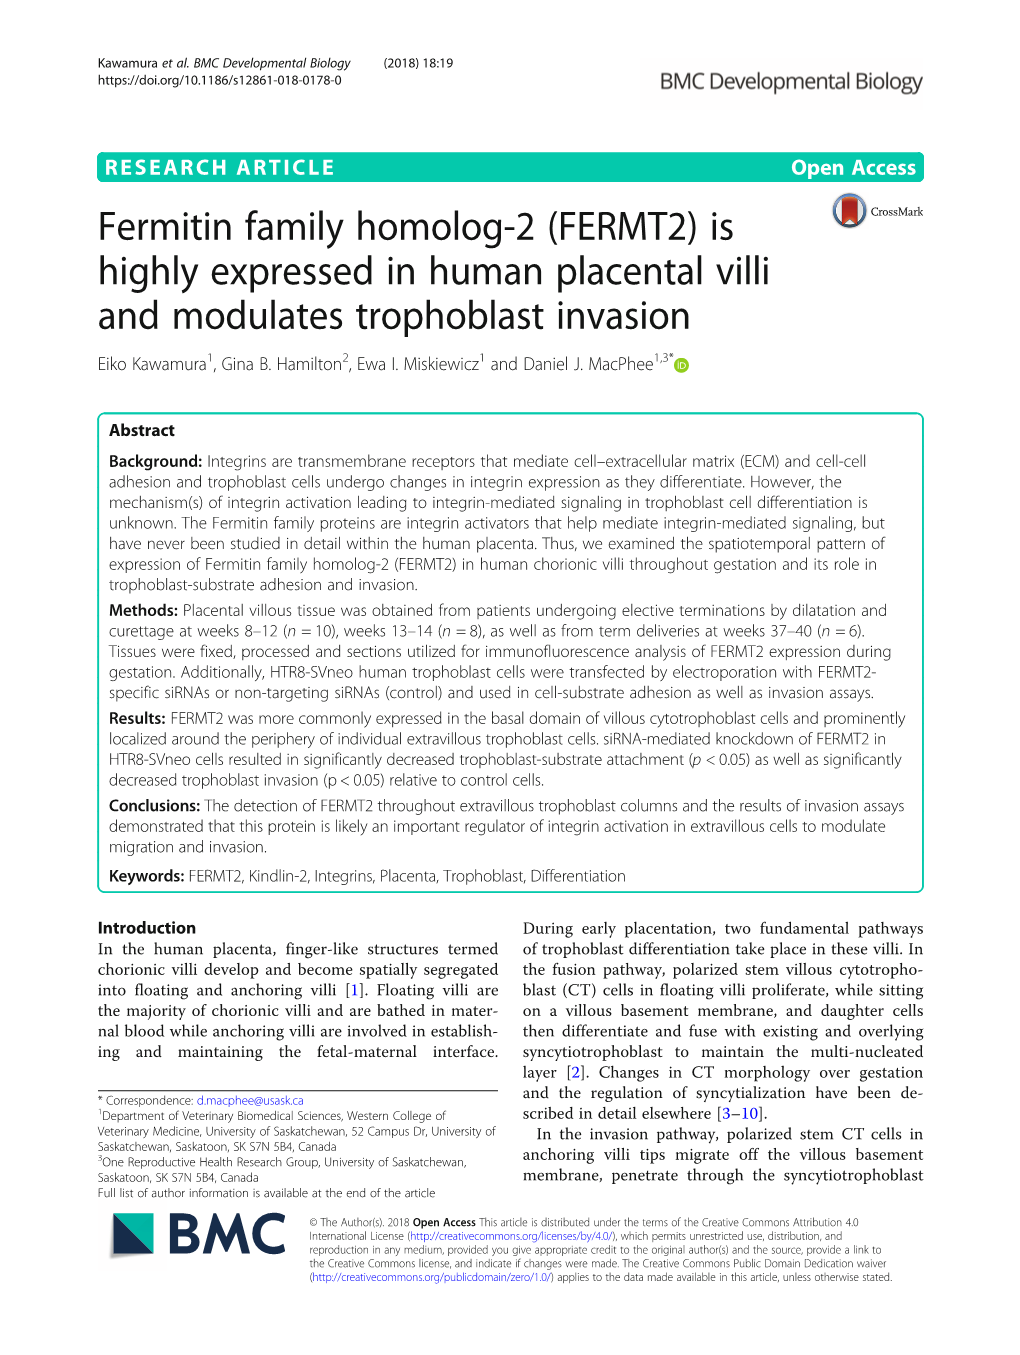 (FERMT2) Is Highly Expressed in Human Placental Villi and Modulates Trophoblast Invasion Eiko Kawamura1, Gina B